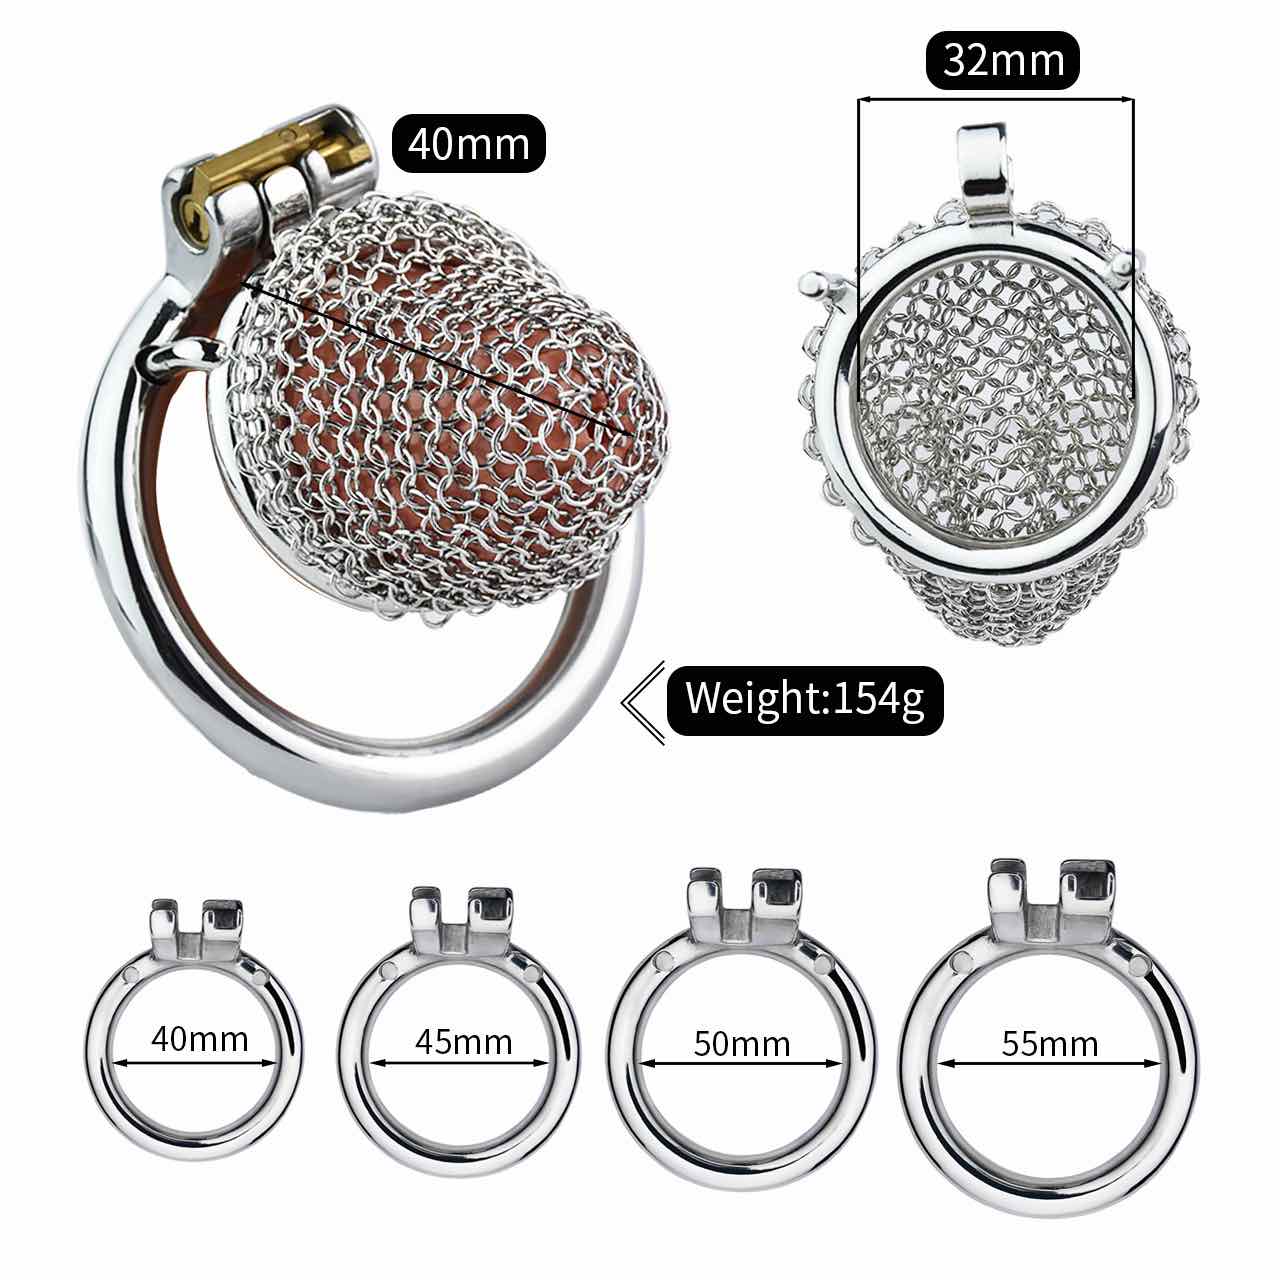 Metal Chastity Cage Mesh Male Locks Devices - Cage Length:  40 mm/1.6 inch (S)